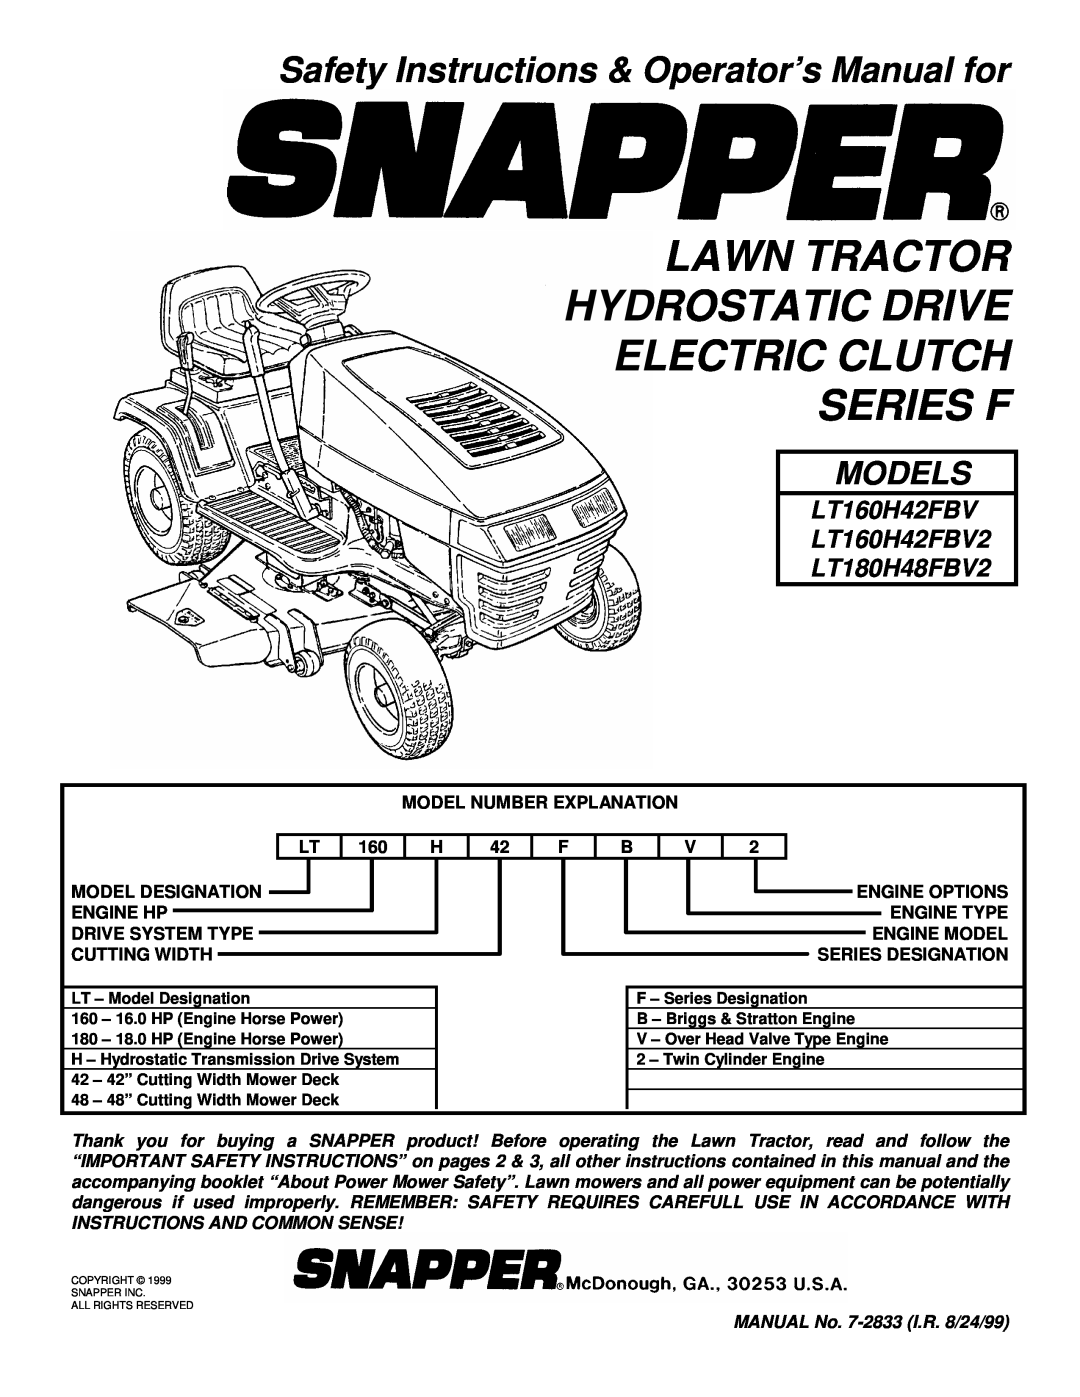 Snapper LT180H48FBV2 important safety instructions Lawn Tractor Hydrostatic Drive Electric Clutch Series F, Models 